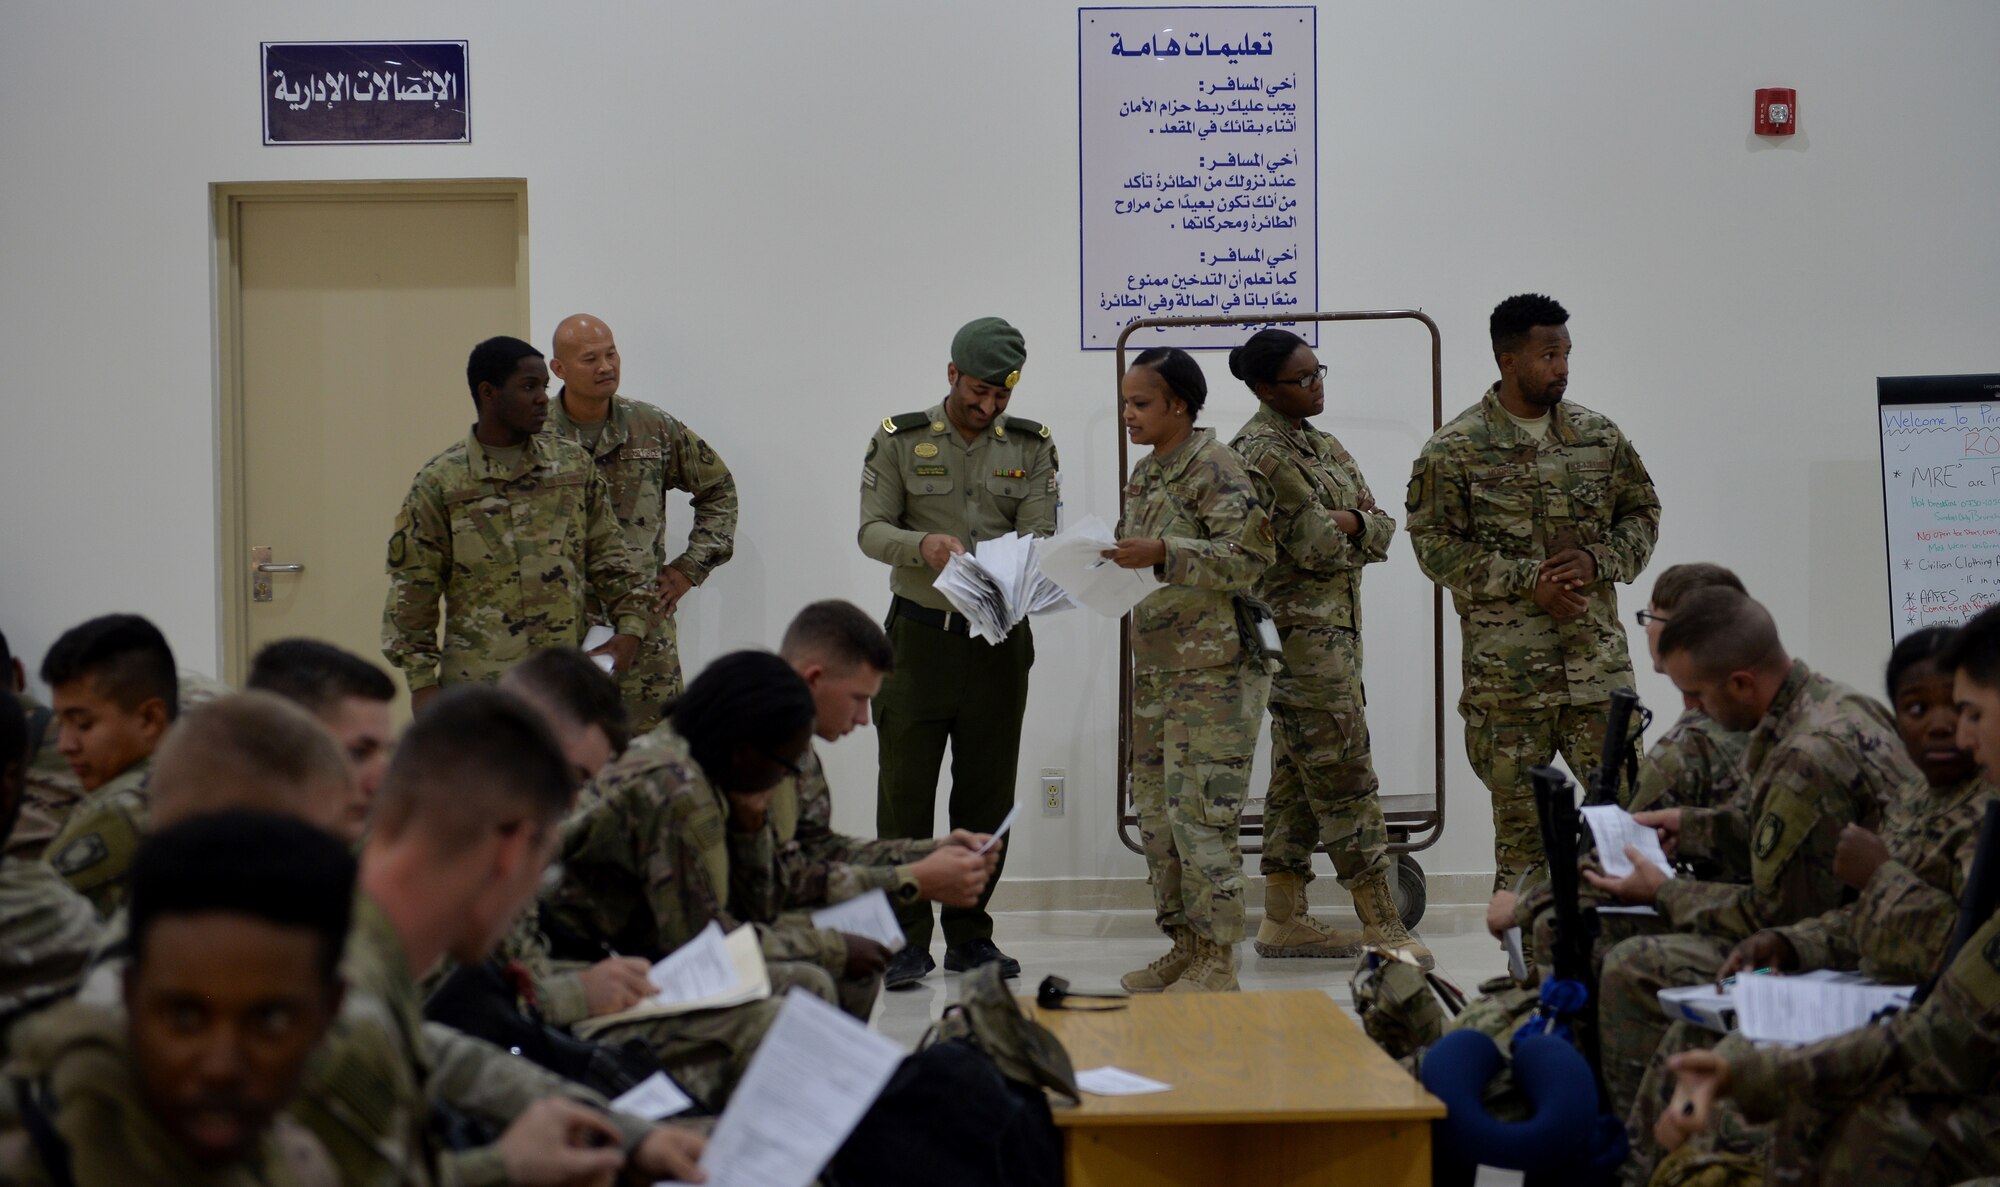 U.S. Army Soldiers with 4-5 Air Defense Artillery Battalion, Ft. Hood, Texas, receive a new-comers brief at Prince Sultan Air Base (PSAB), Kingdom of Saudi Arabia (KSA), October 21, 2019.